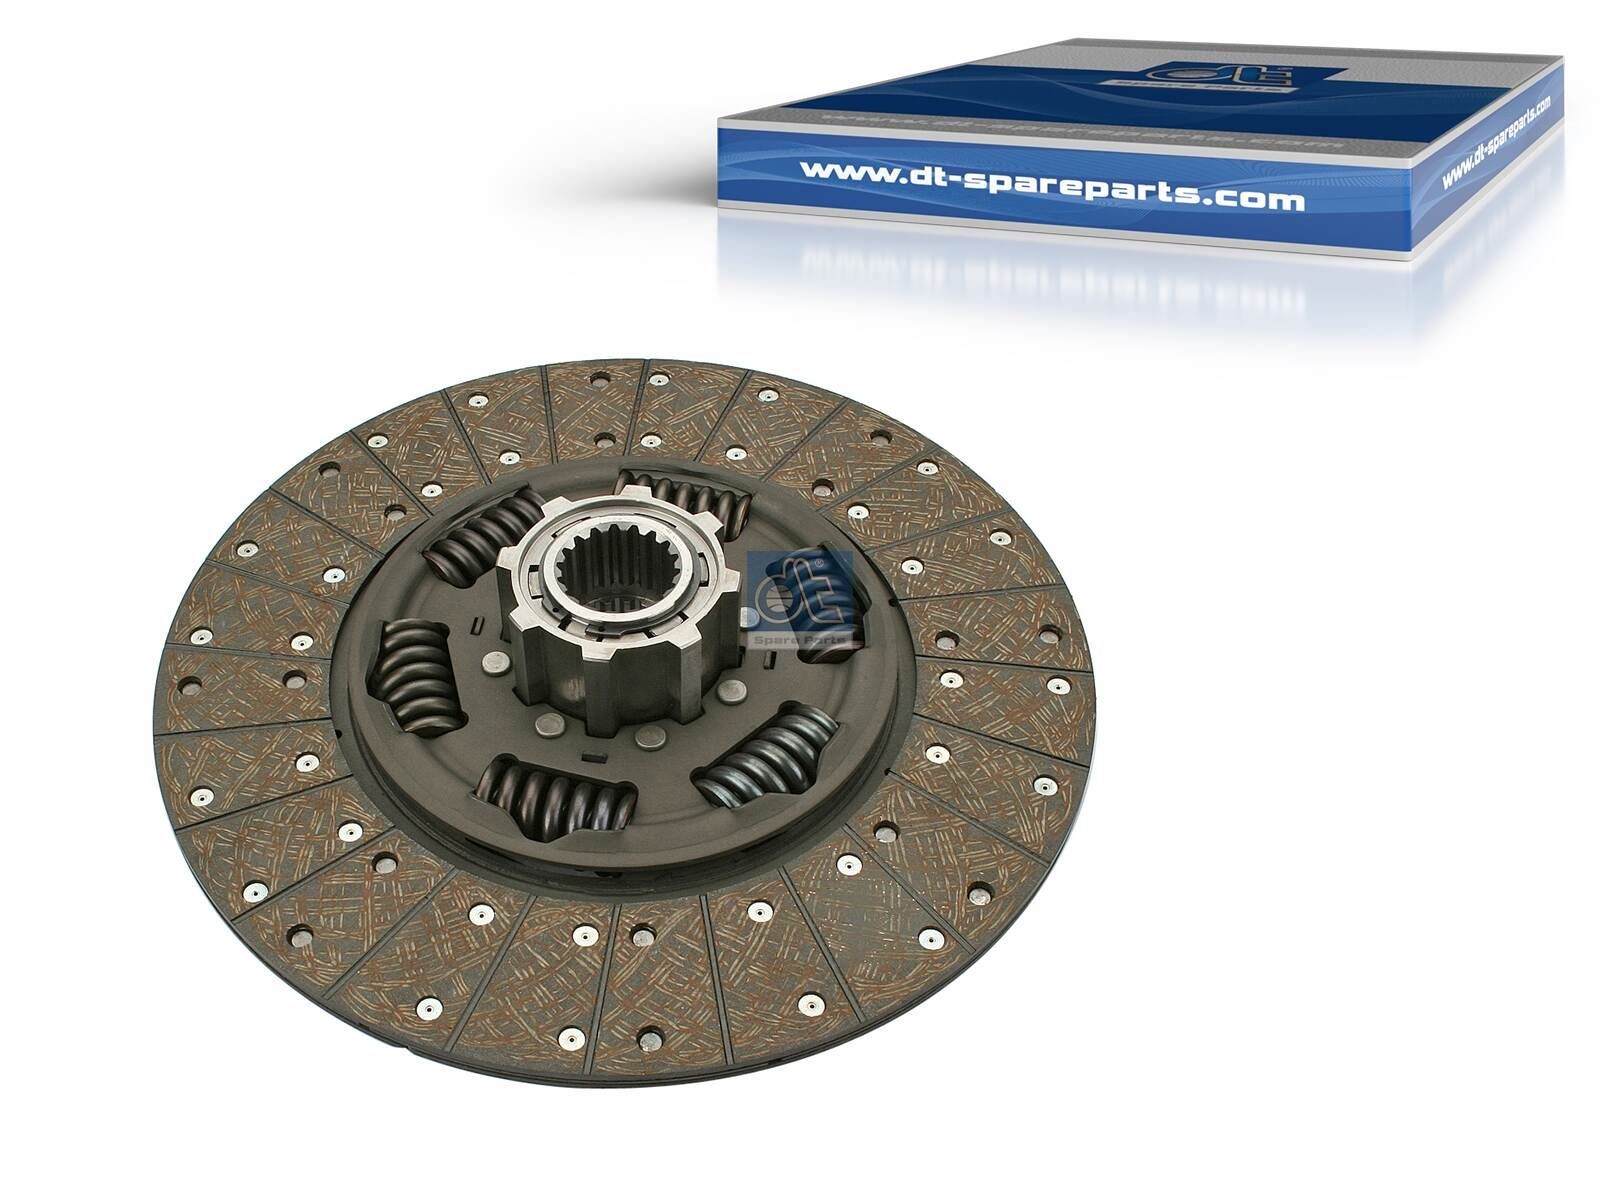 1878 002 024 DT Spare Parts 400mm, Number of Teeth: 18 Clutch Plate 4.62792 buy